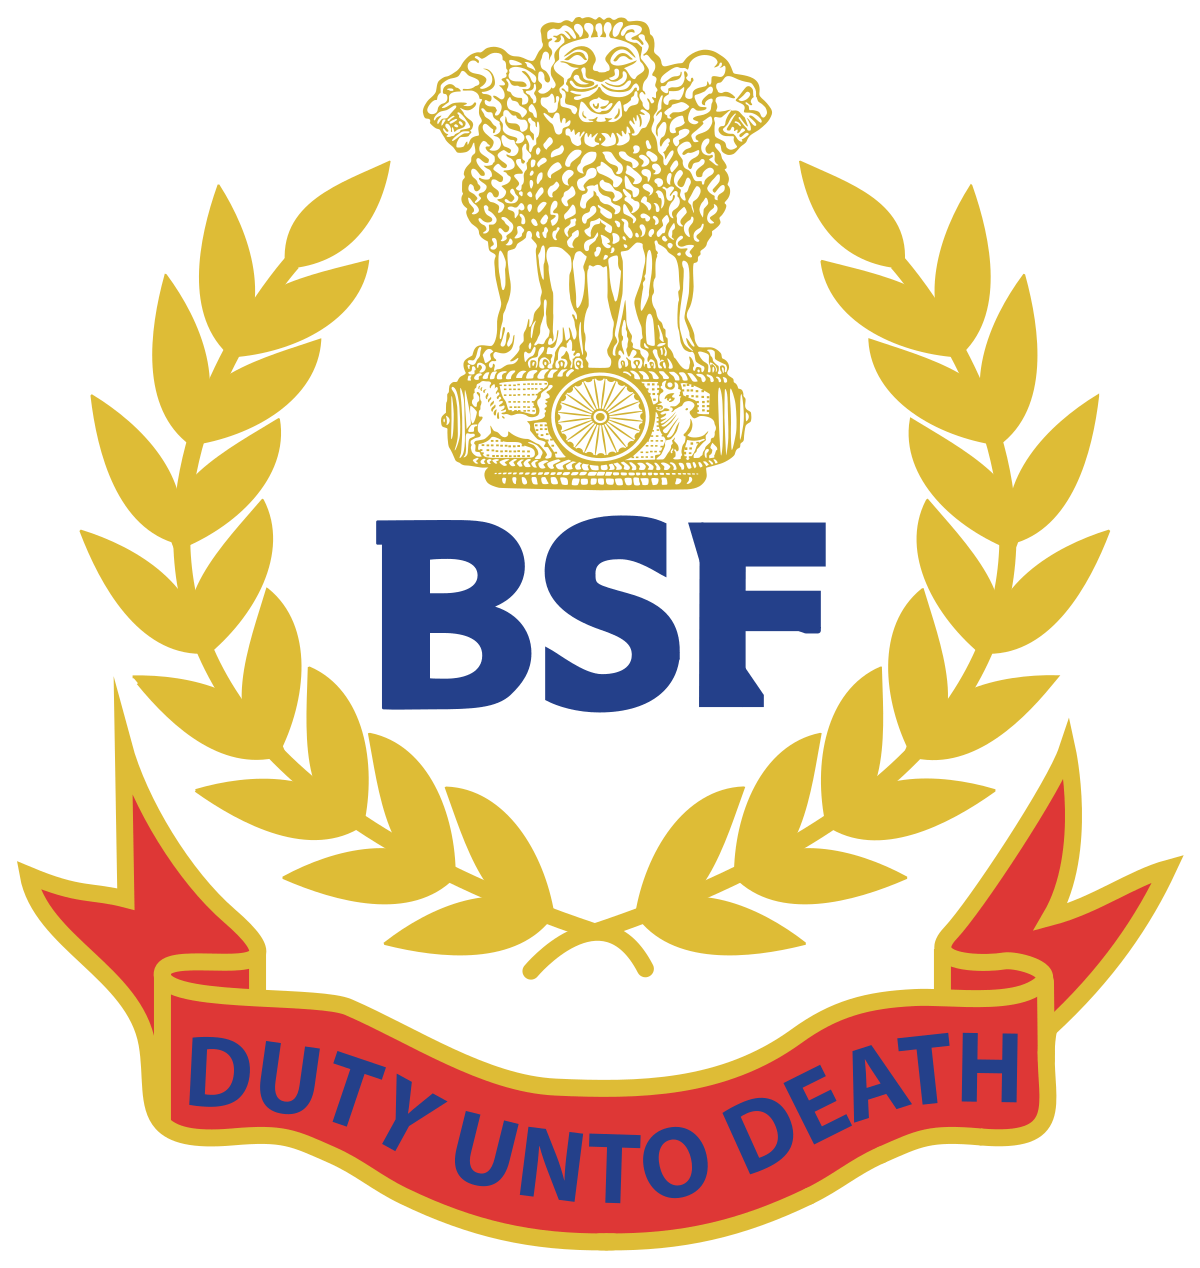 BSF Logo - Border Security Force